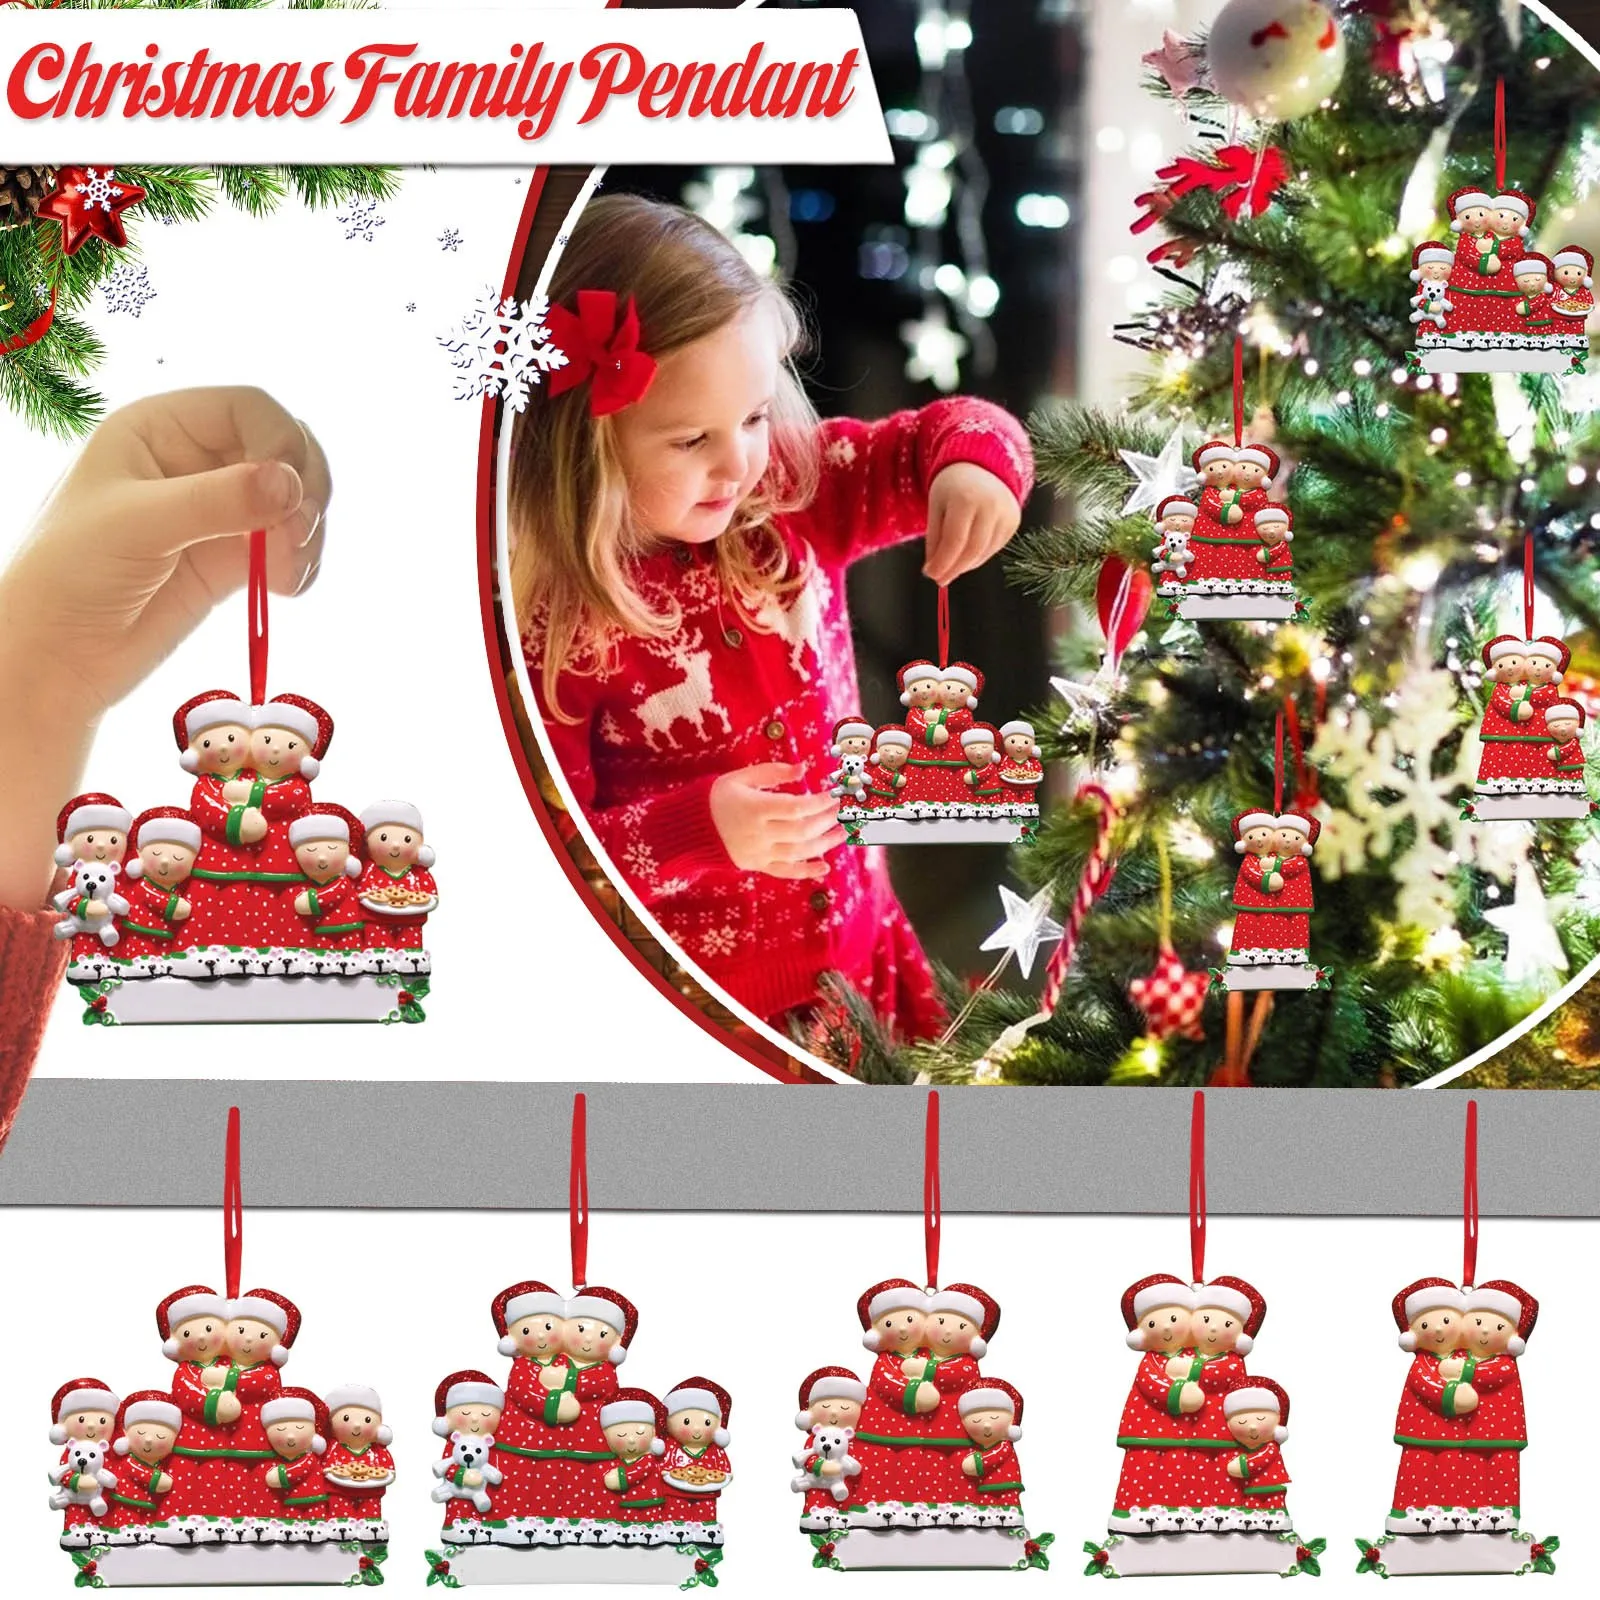 Details about   2020 Personalized Family Christmas Tree Ornament Survived Family Pendant nz 